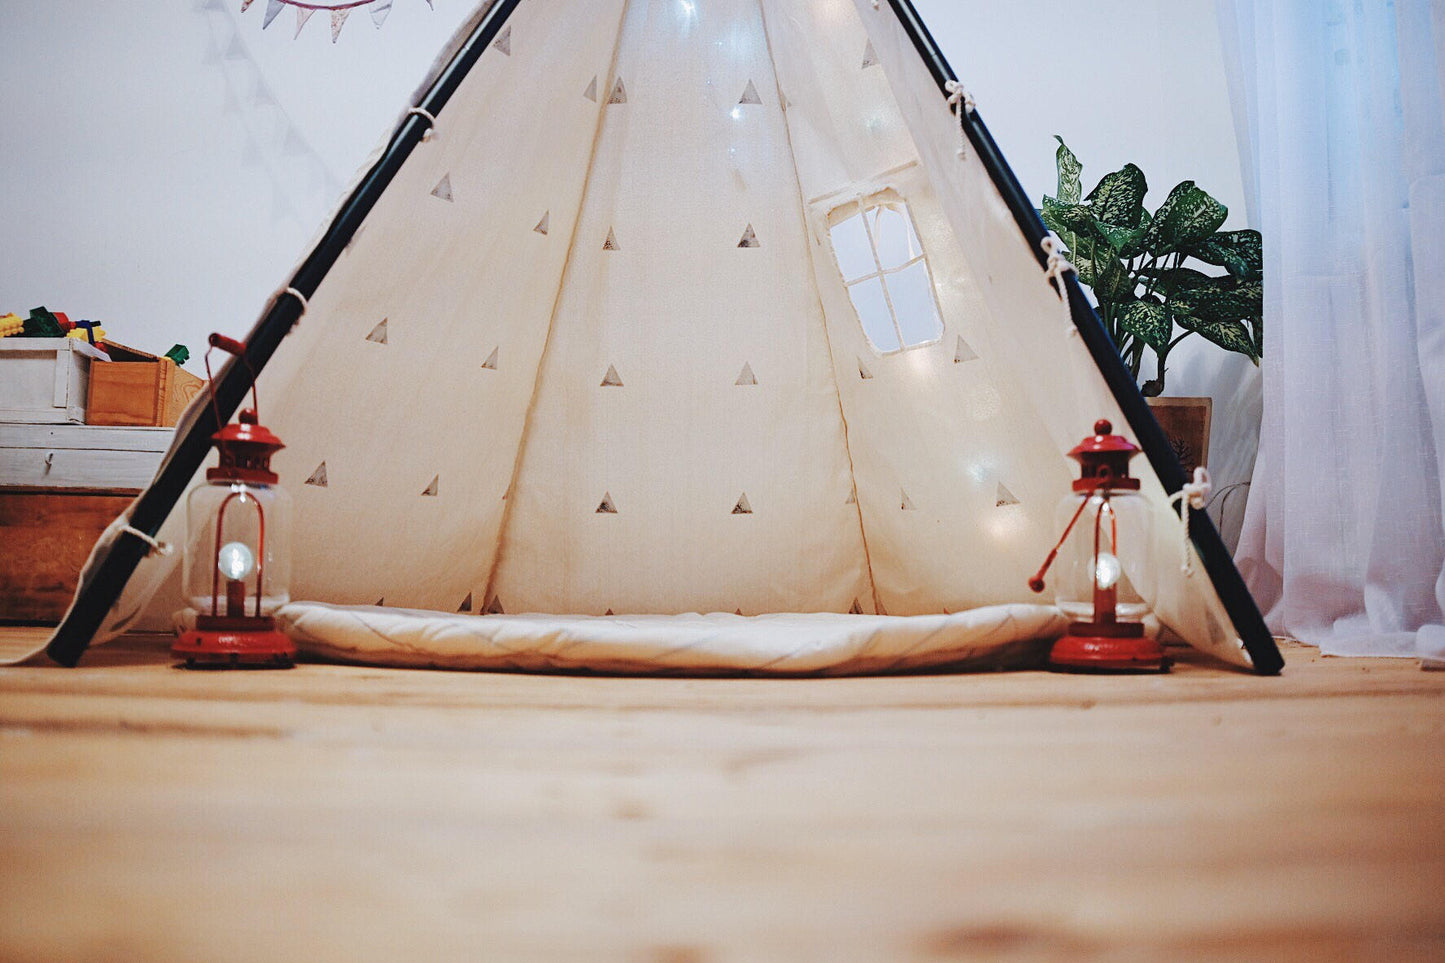 Gray Open Playhouse, Play houses, Play houses for kids, Play houses for children, Canvas tepee,canvas tent, canvas teepee tent, teepee tent